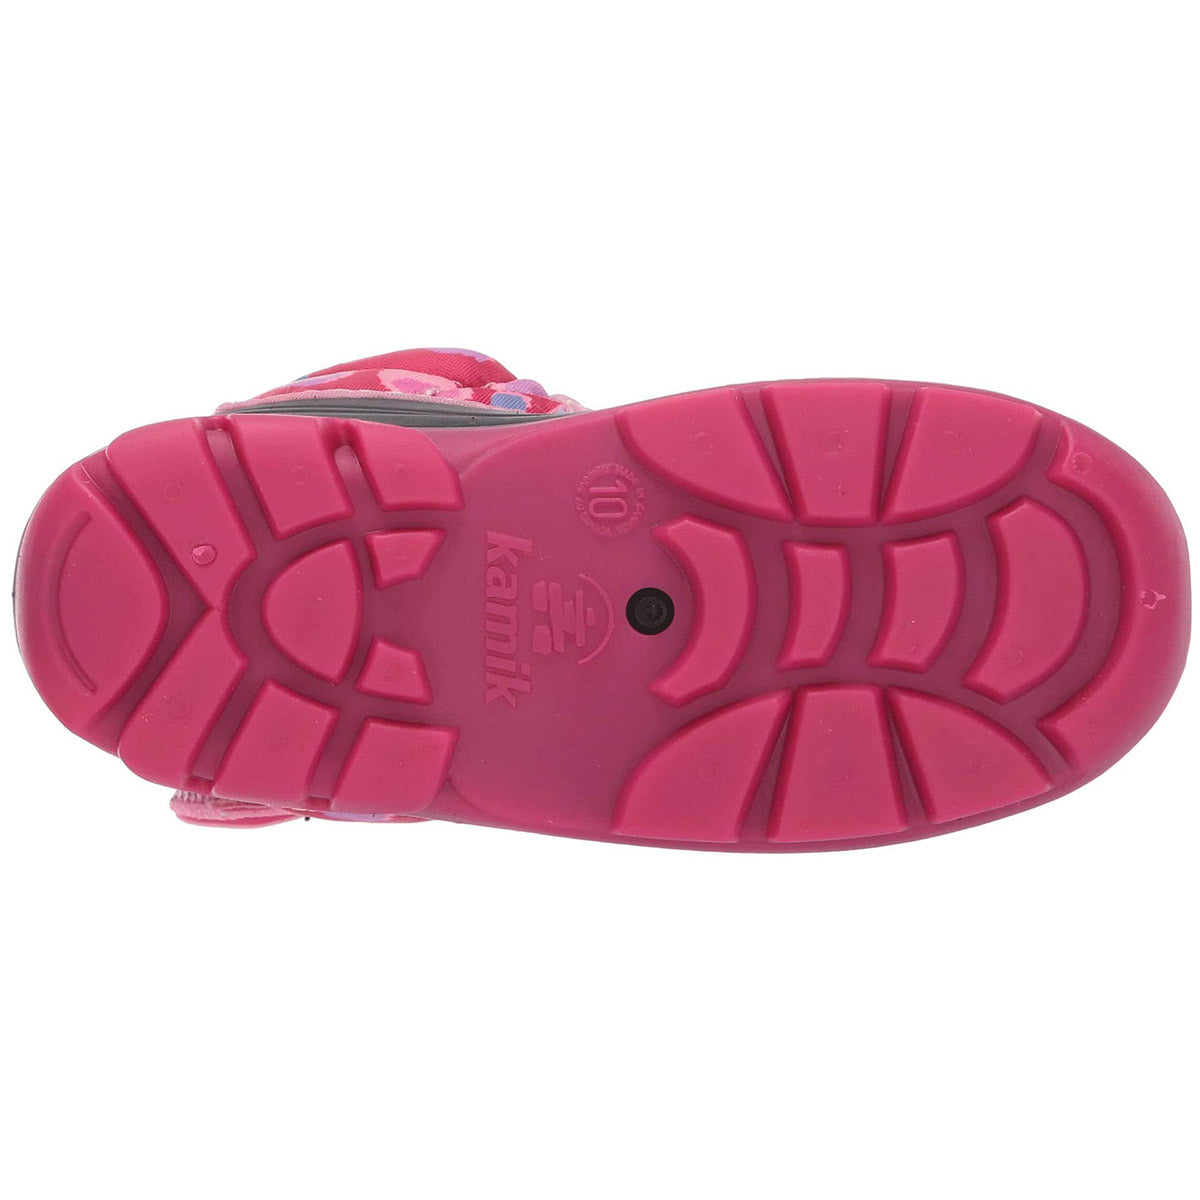 Bottom view of a toddler&#39;s pink Kamik Snowbug 4 Bright Rose snow boots showing the tread pattern and brand logo, comfortable down to -10°F.